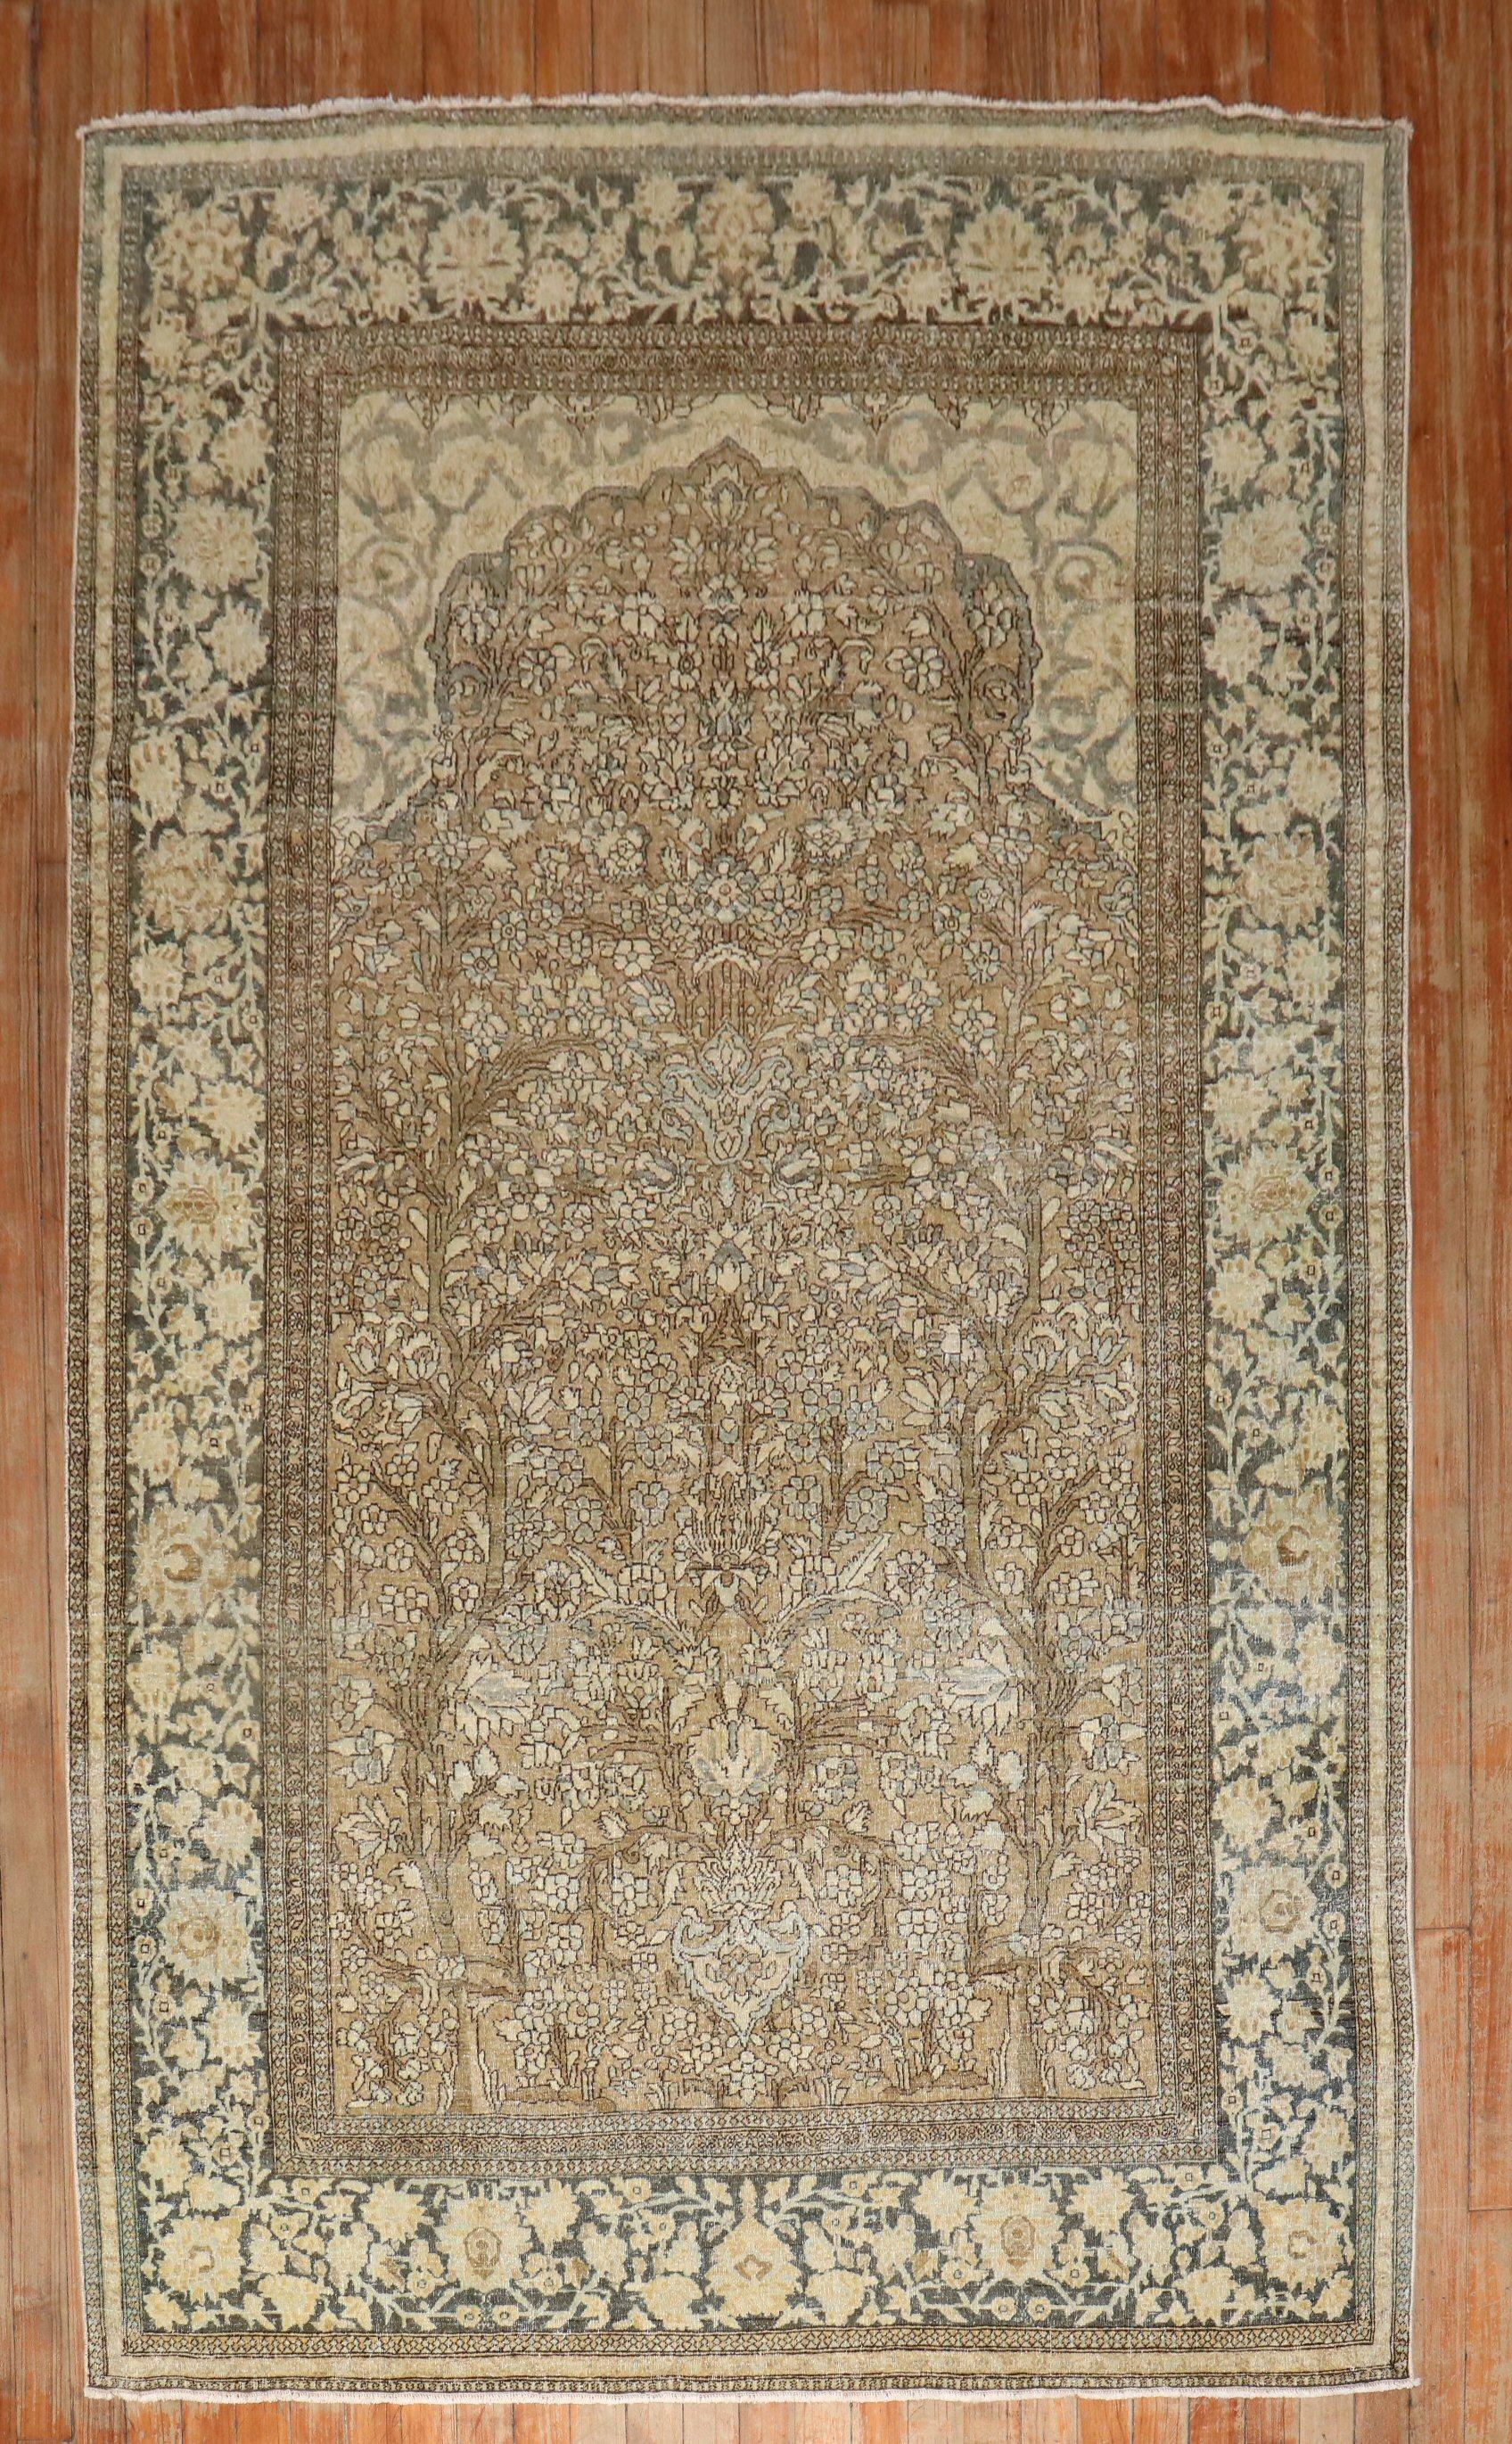 Beautiful Persian Isfahan rug with a mihrab pattern in brown and green from the 1st quarter of the 20th century

4'6'' x 7'6''.